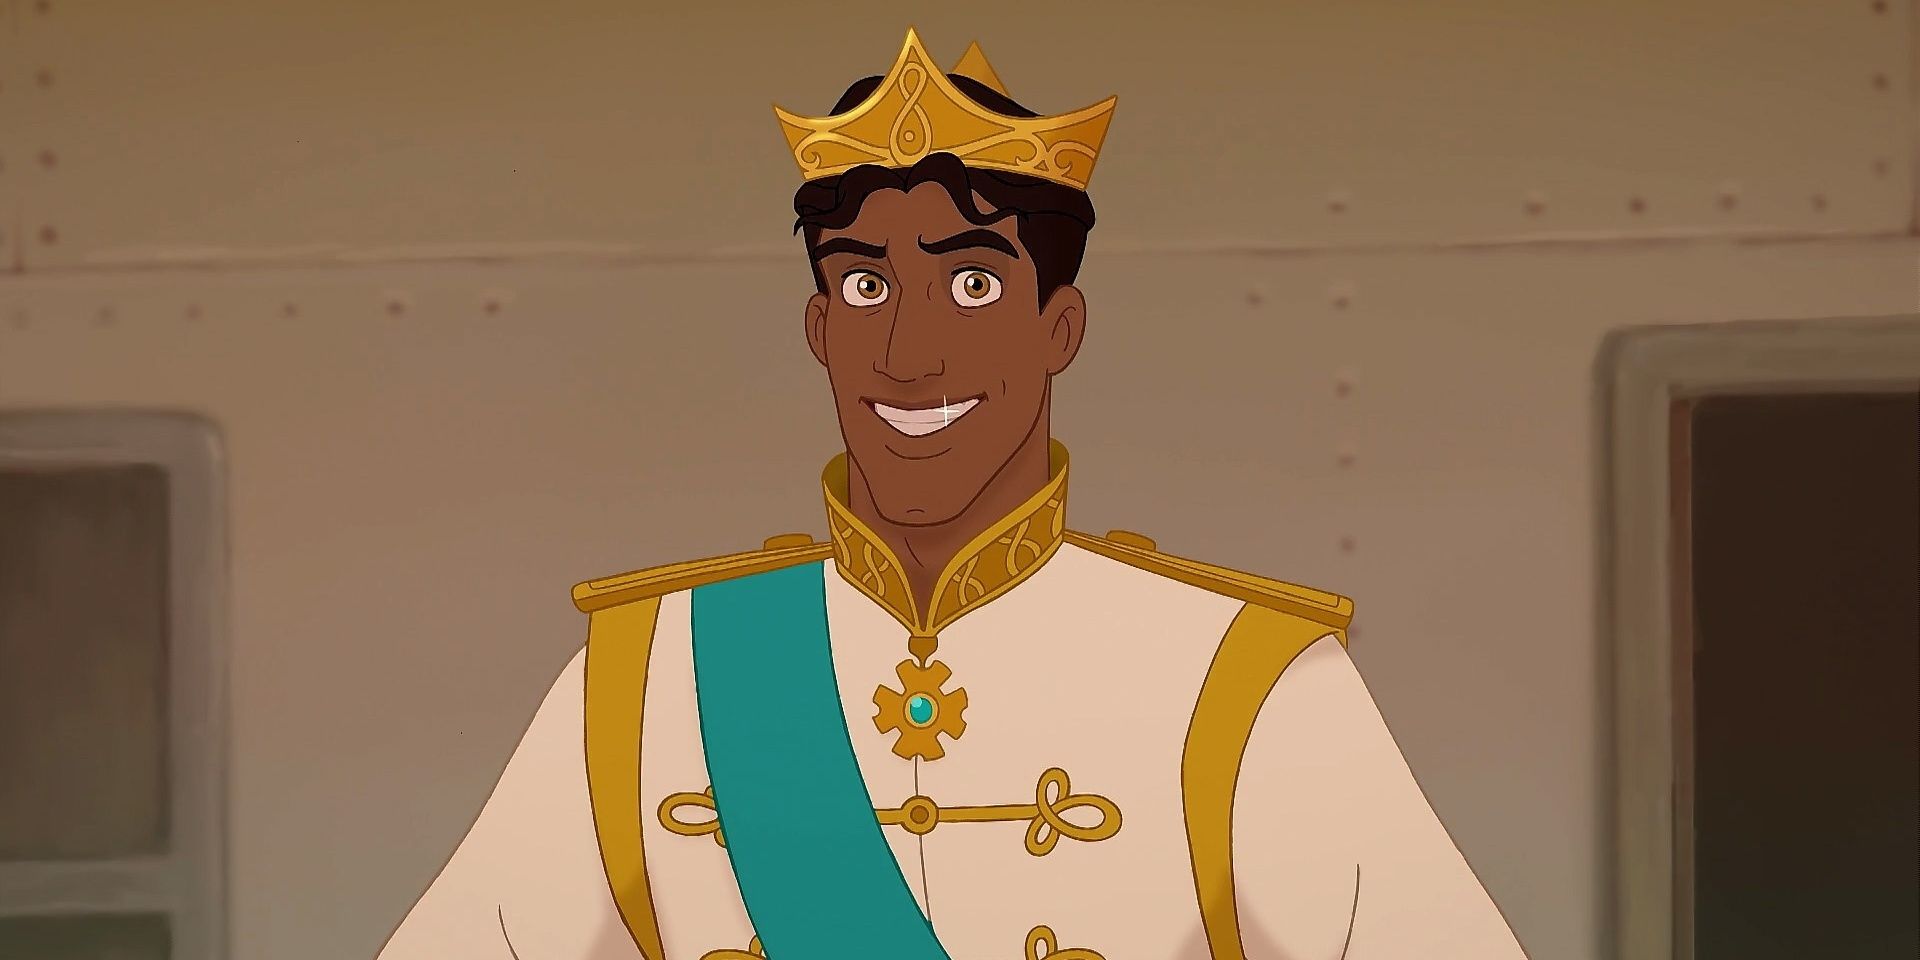 Prince Naveen from Princess And The Frog